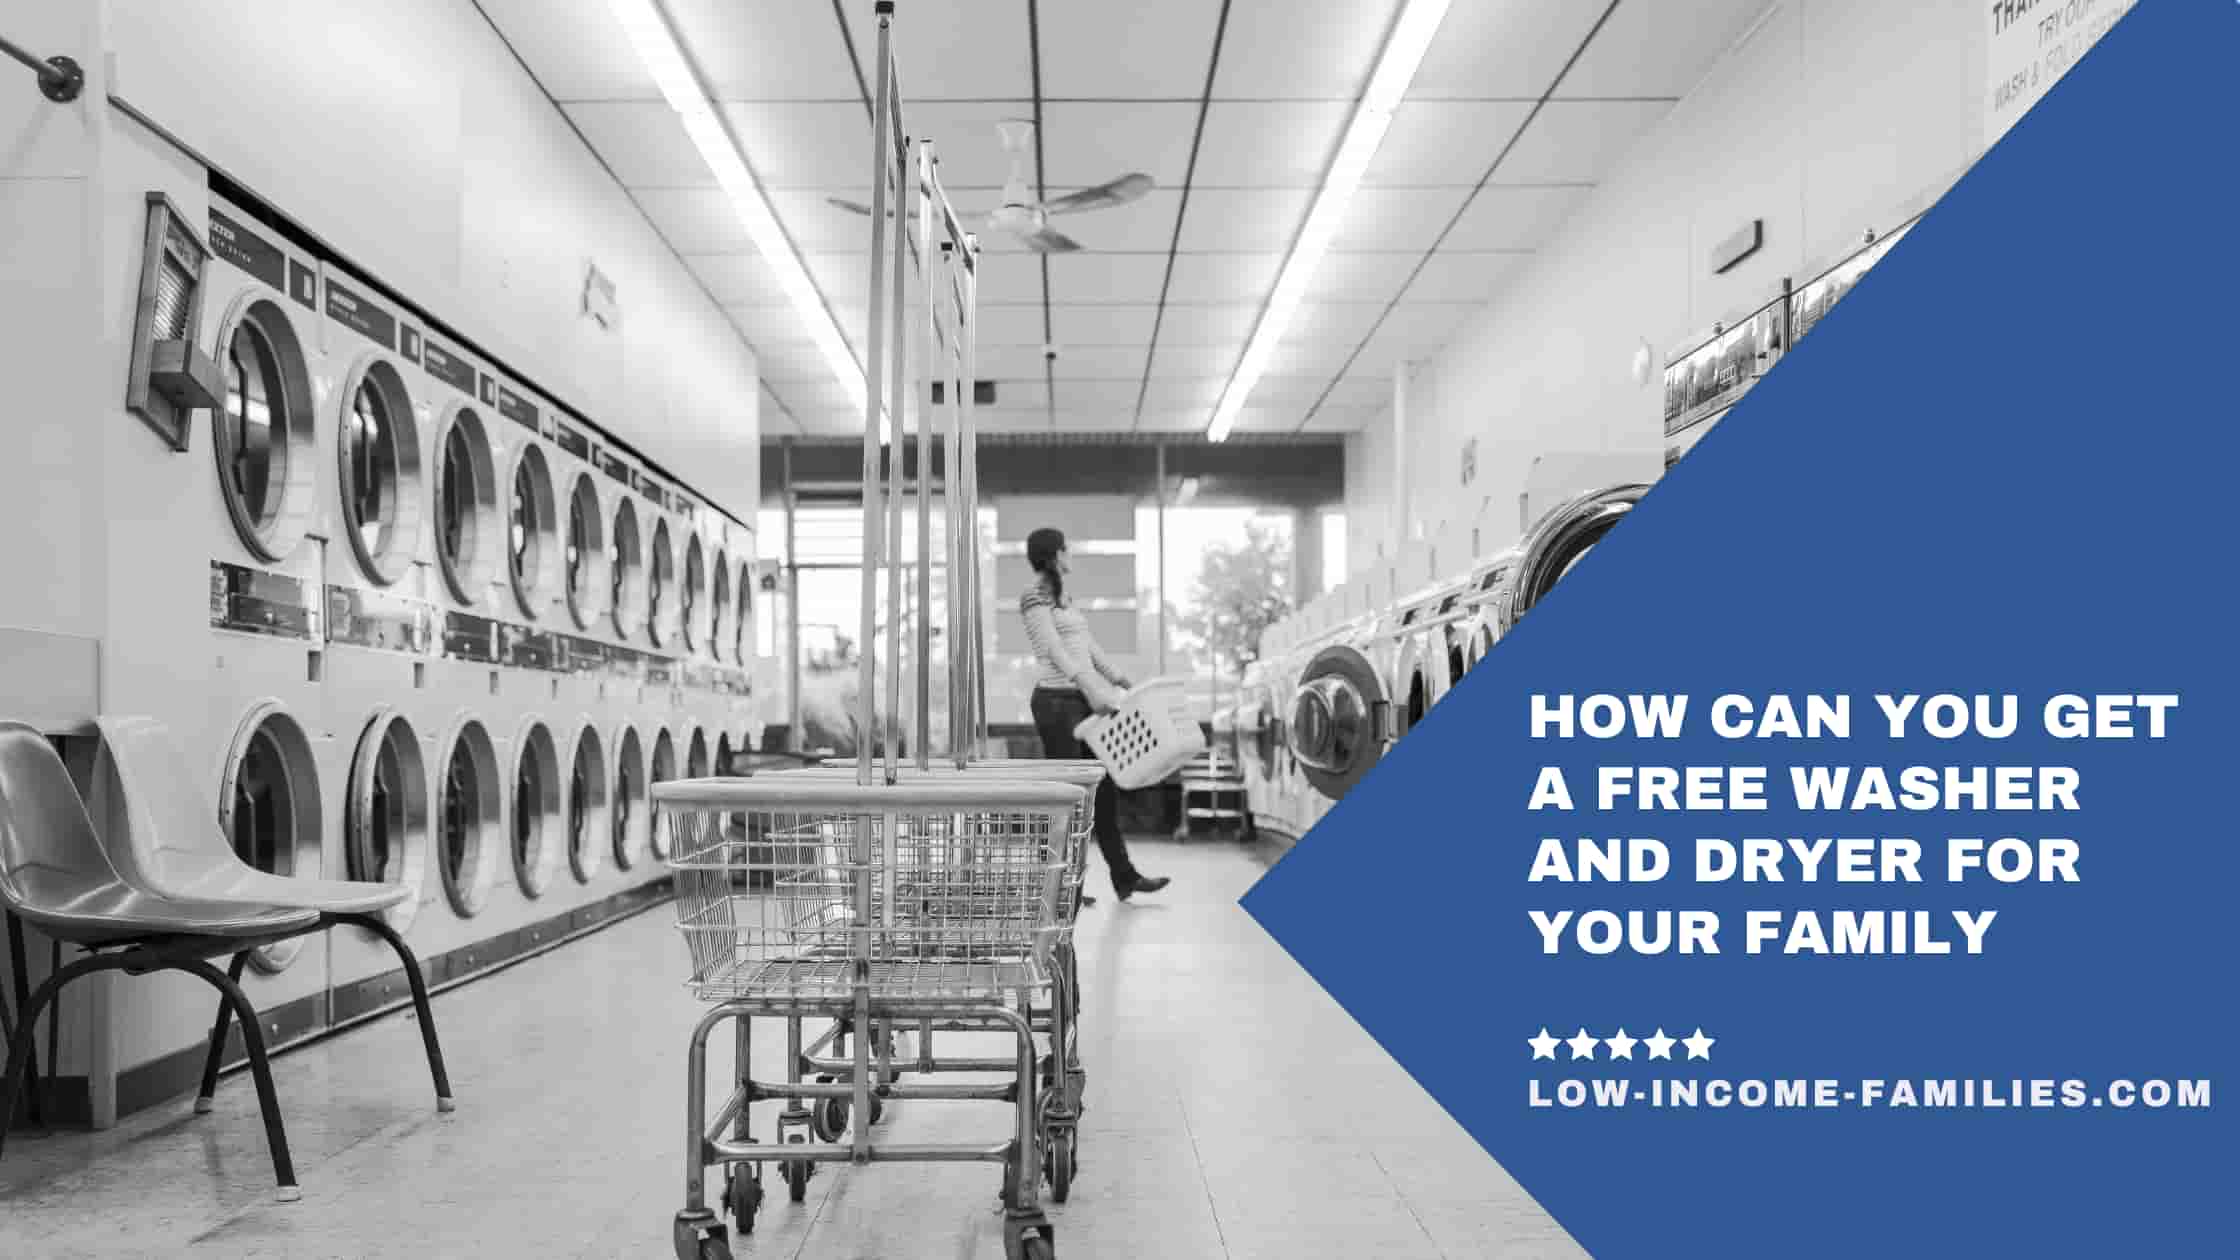 How Can You Get a Free Washer and Dryer for Your Family?